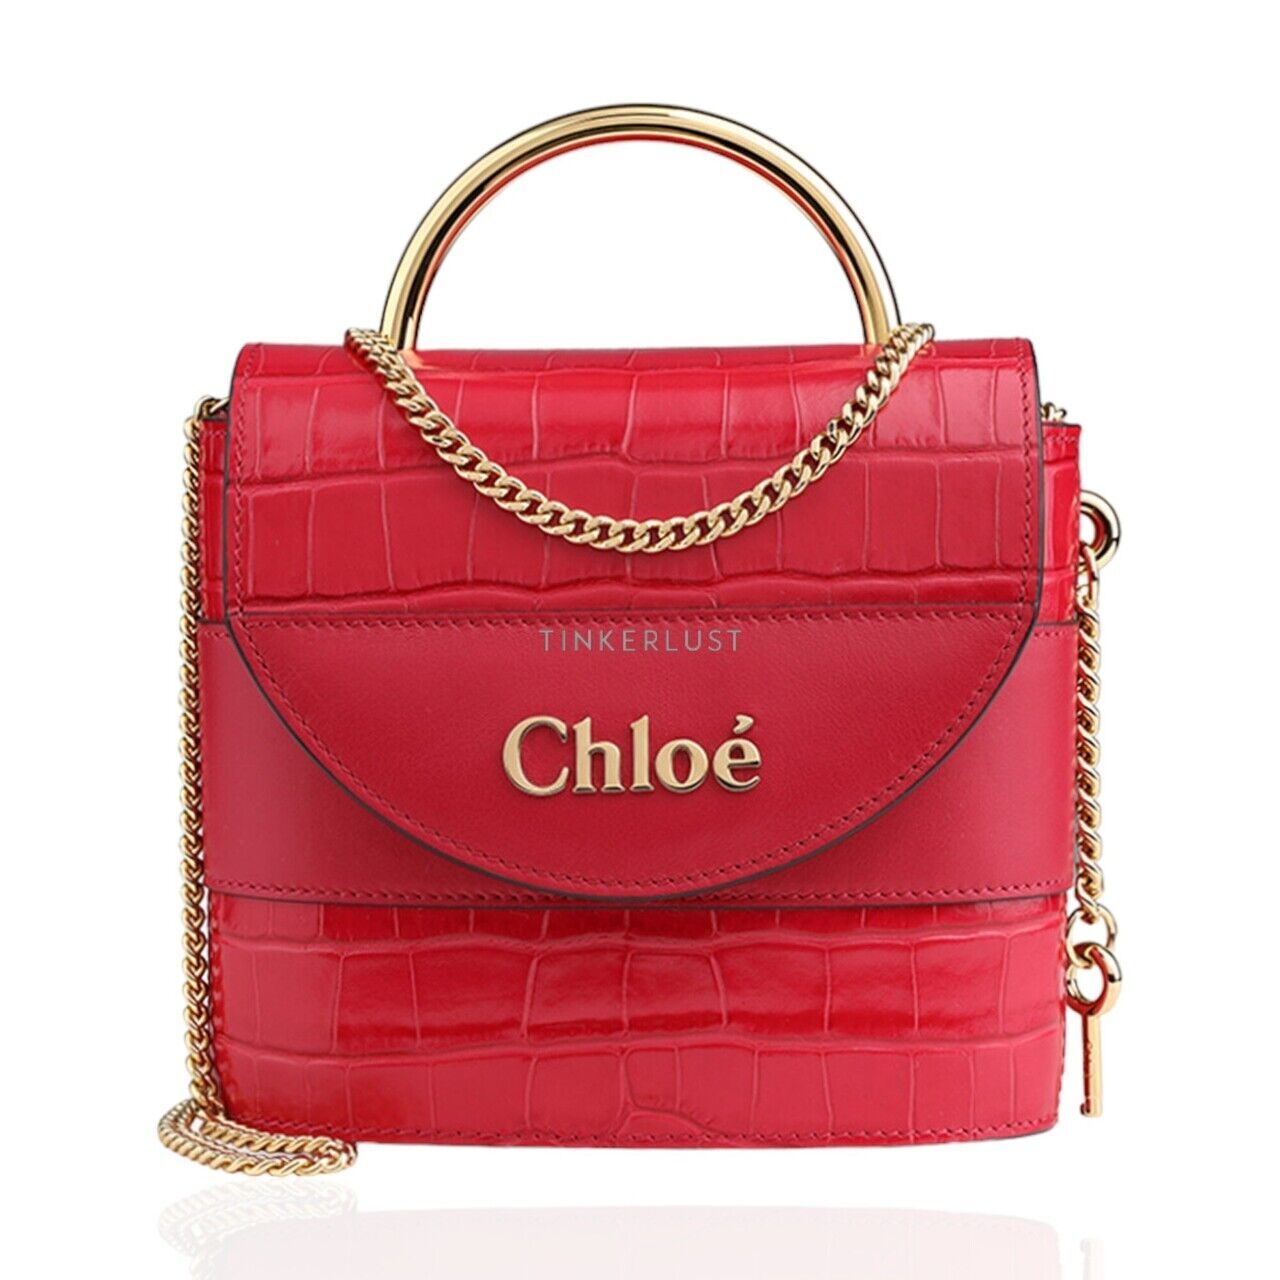 Chloe Small Abylock Top Handle Bag in Crimson Pink Croco Leather Satchel